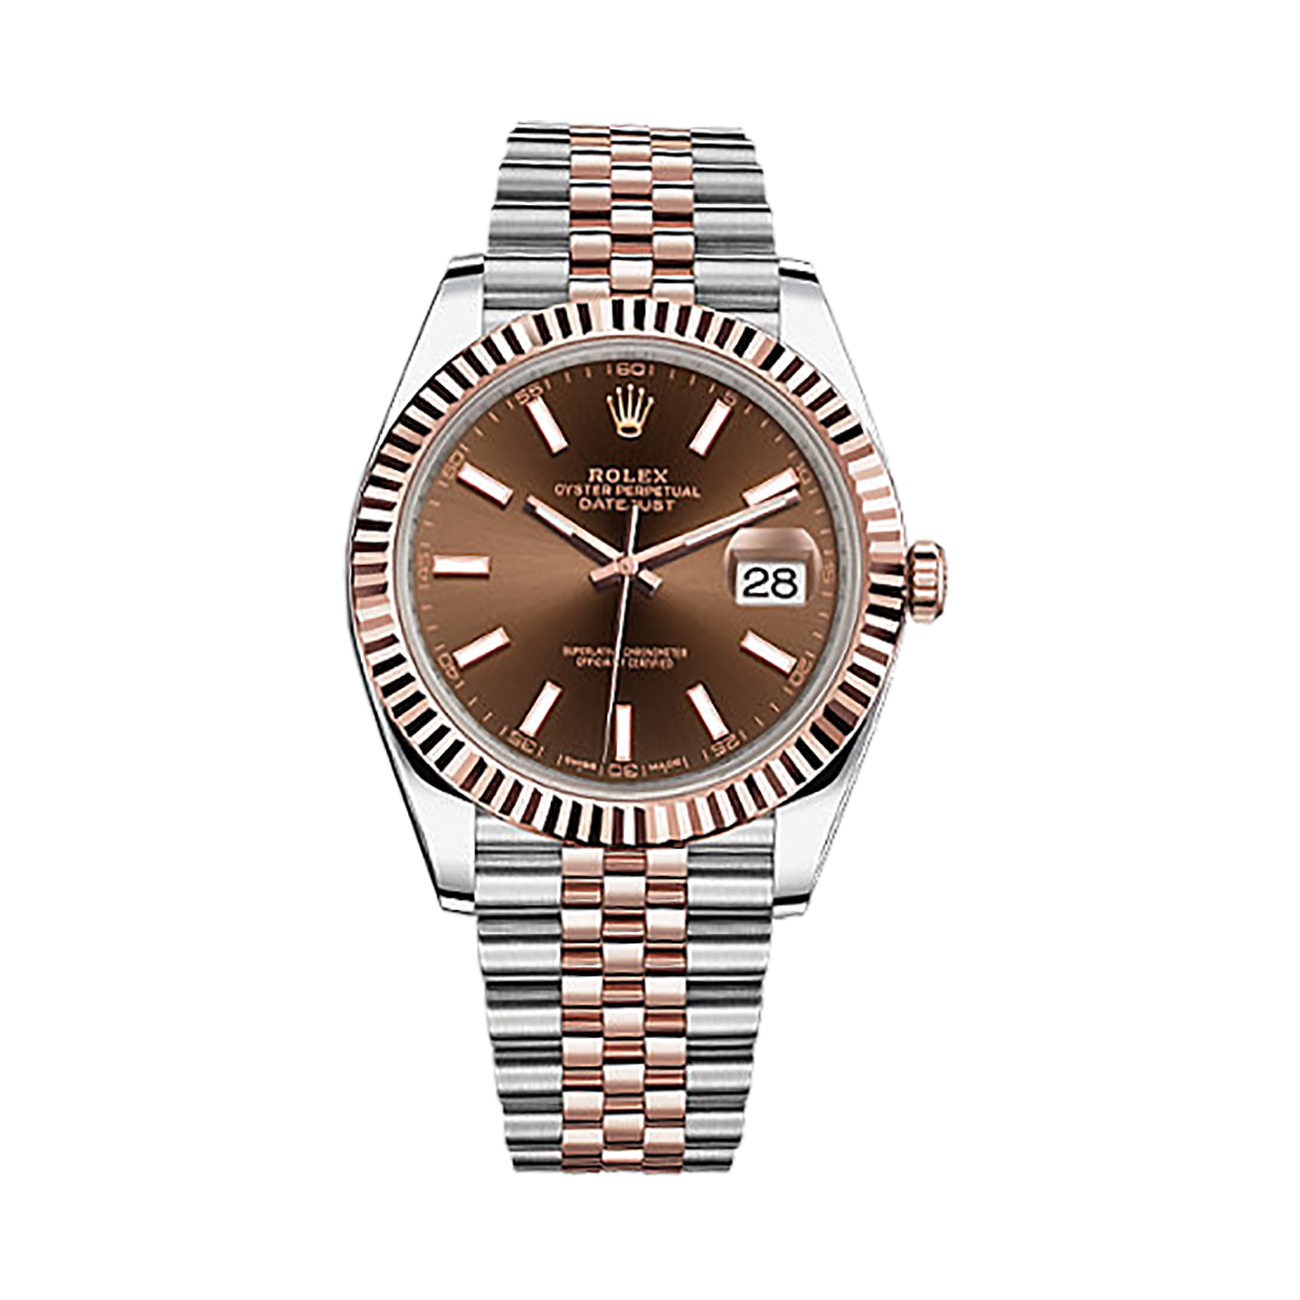 Datejust 41 126331 Rose Gold & Stainless Steel Watch (Chocolate)